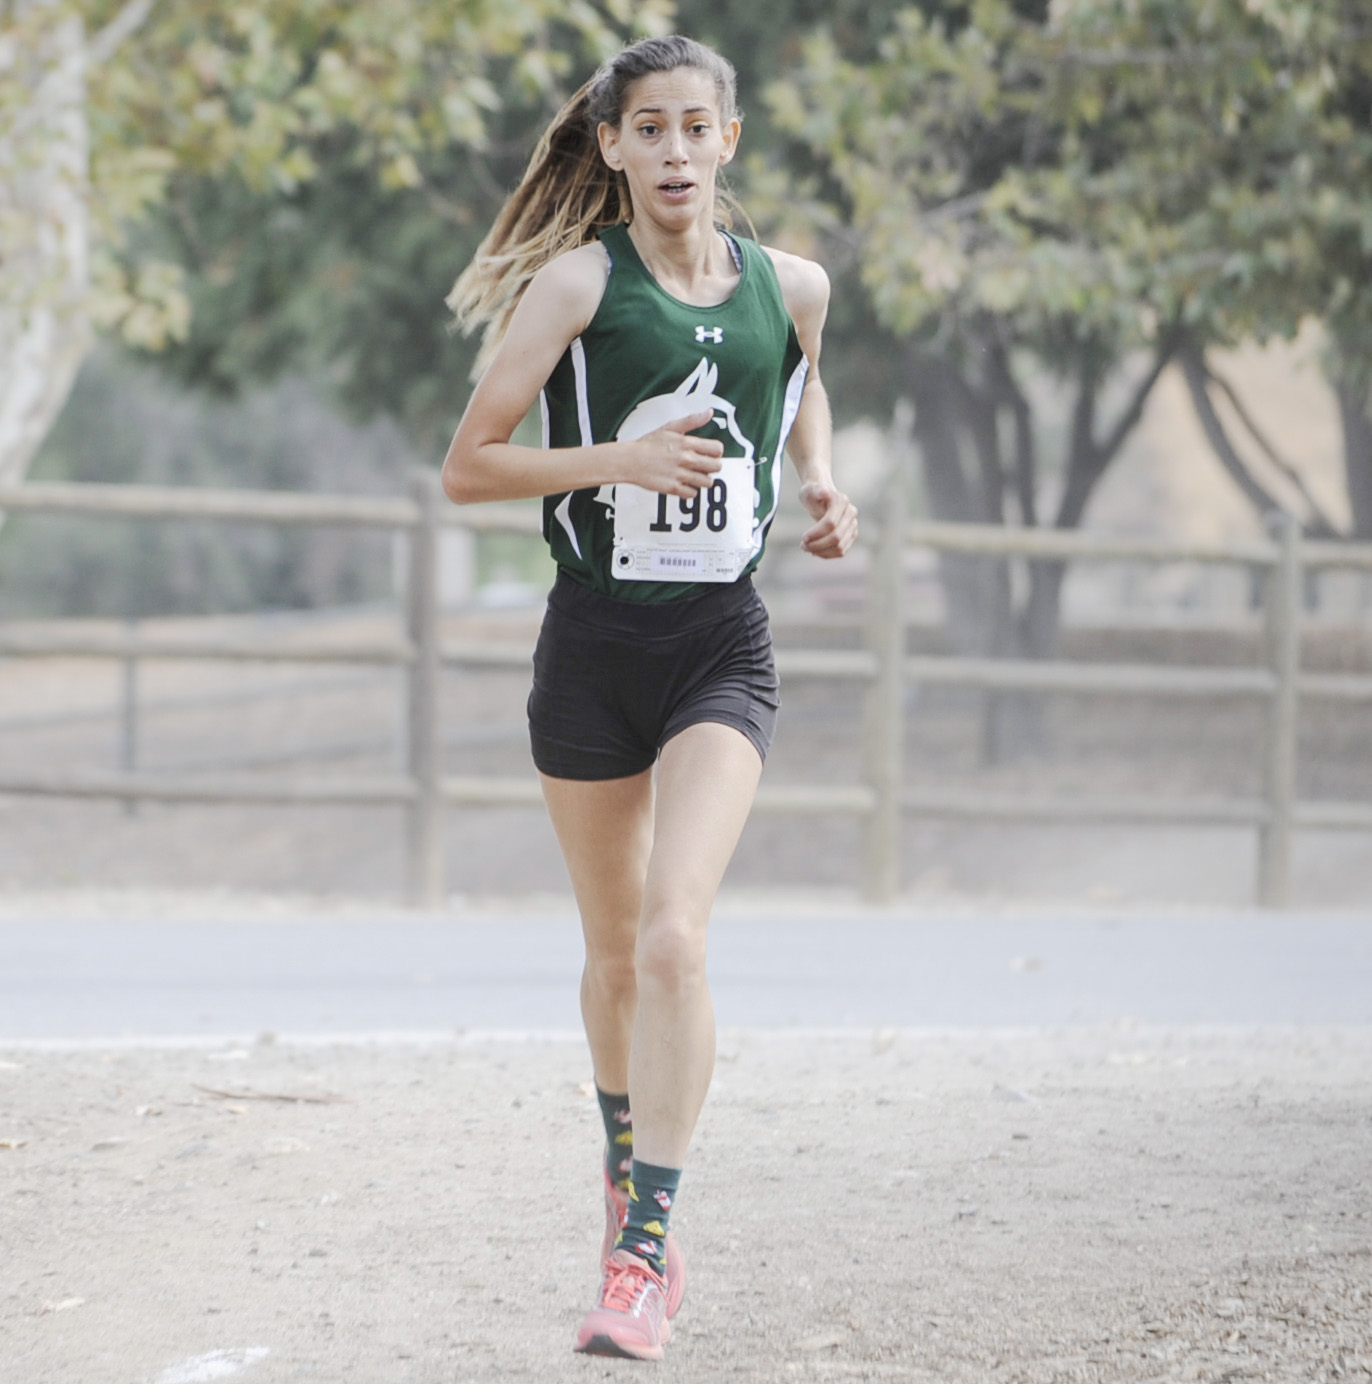 East Los Angeles College freshman Daisy Ortiz eyes the finish line with determination at the SoCal Cross Country Preview Meet. (Photo by Tadzio Garcia)